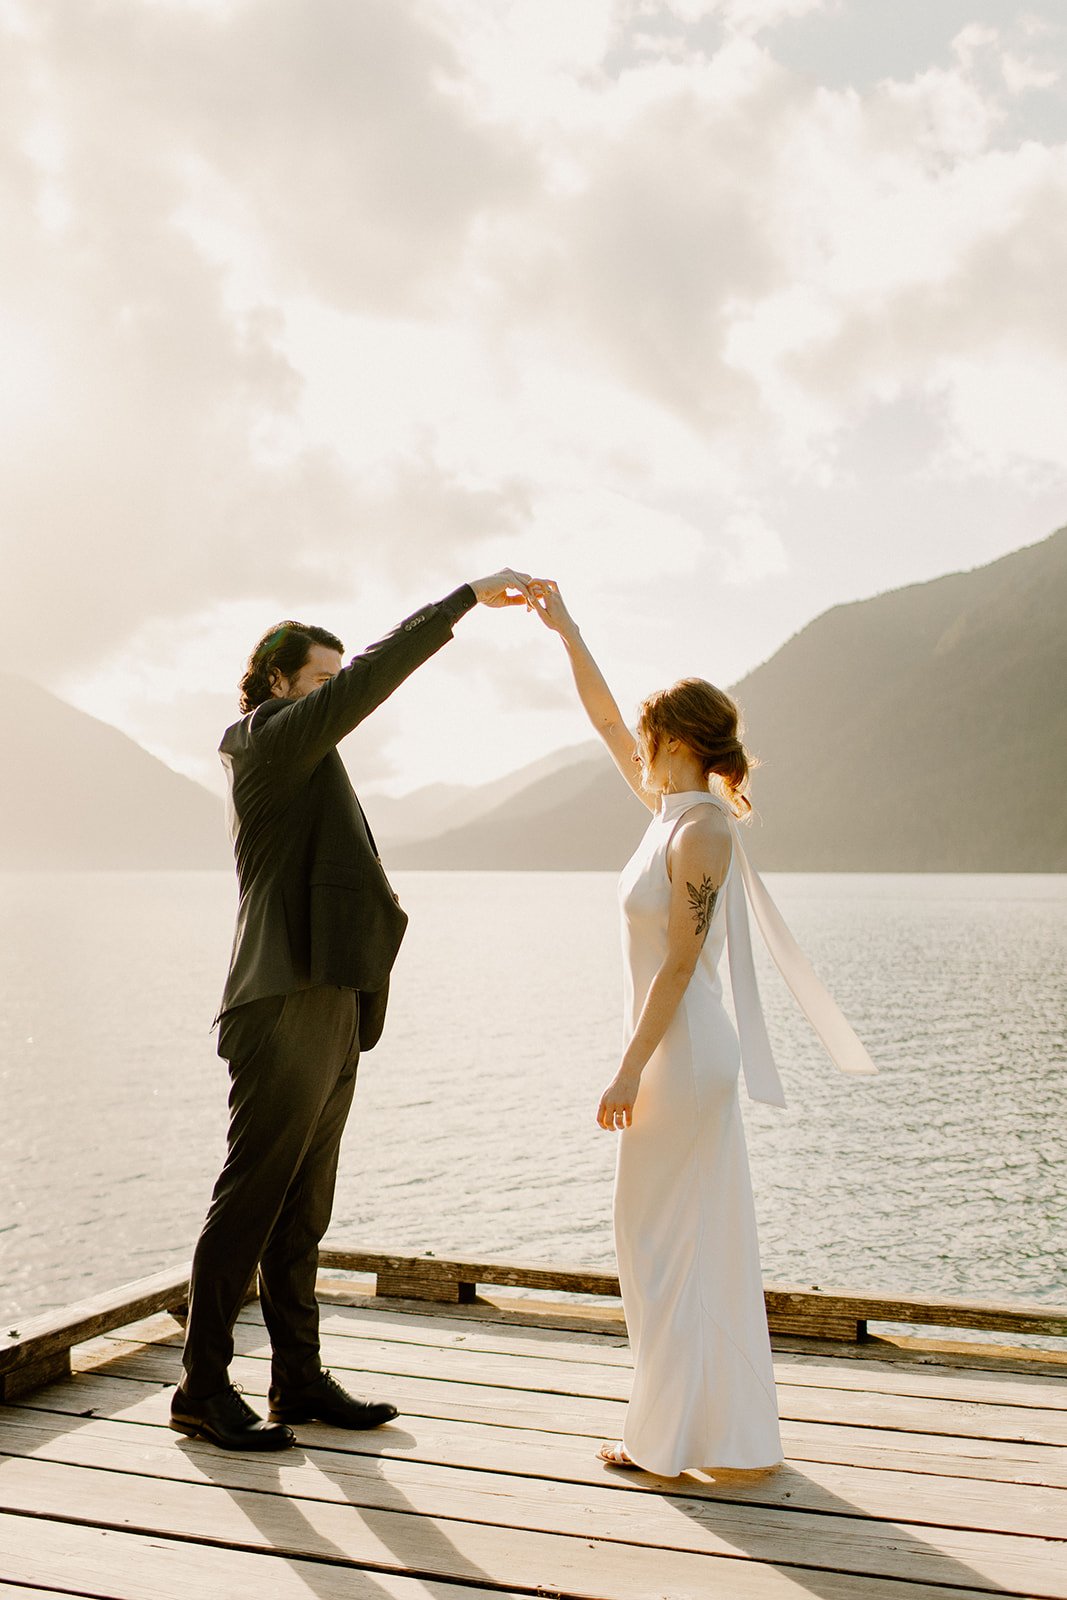 Bride and Groom dancing on the dock at Lake Crescent in Olympic NP